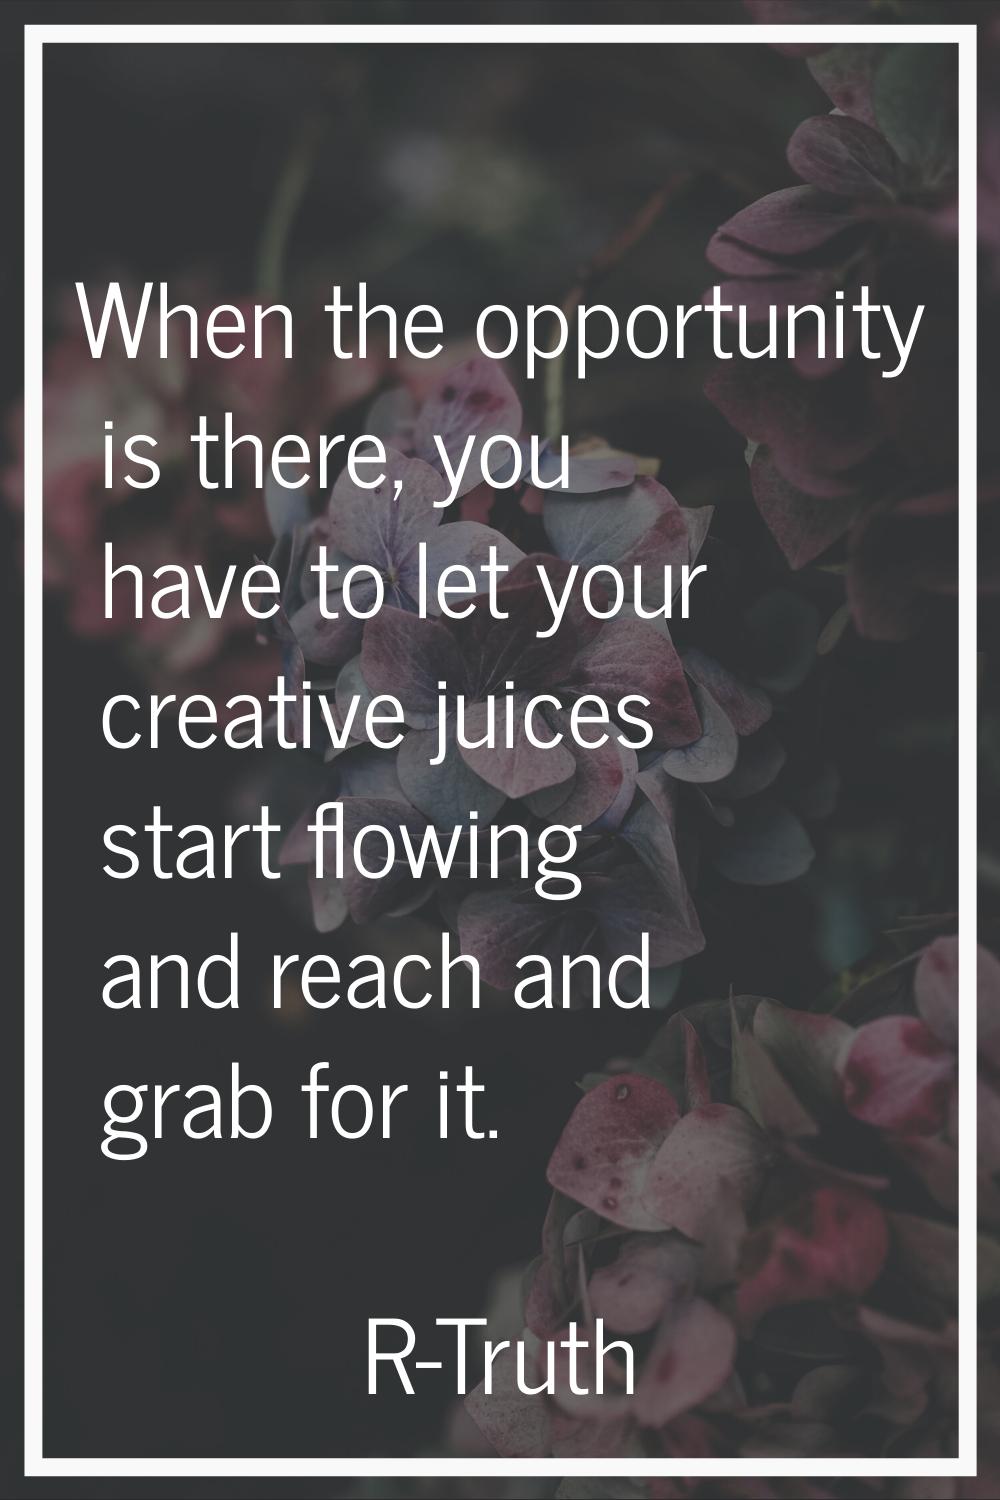 When the opportunity is there, you have to let your creative juices start flowing and reach and gra